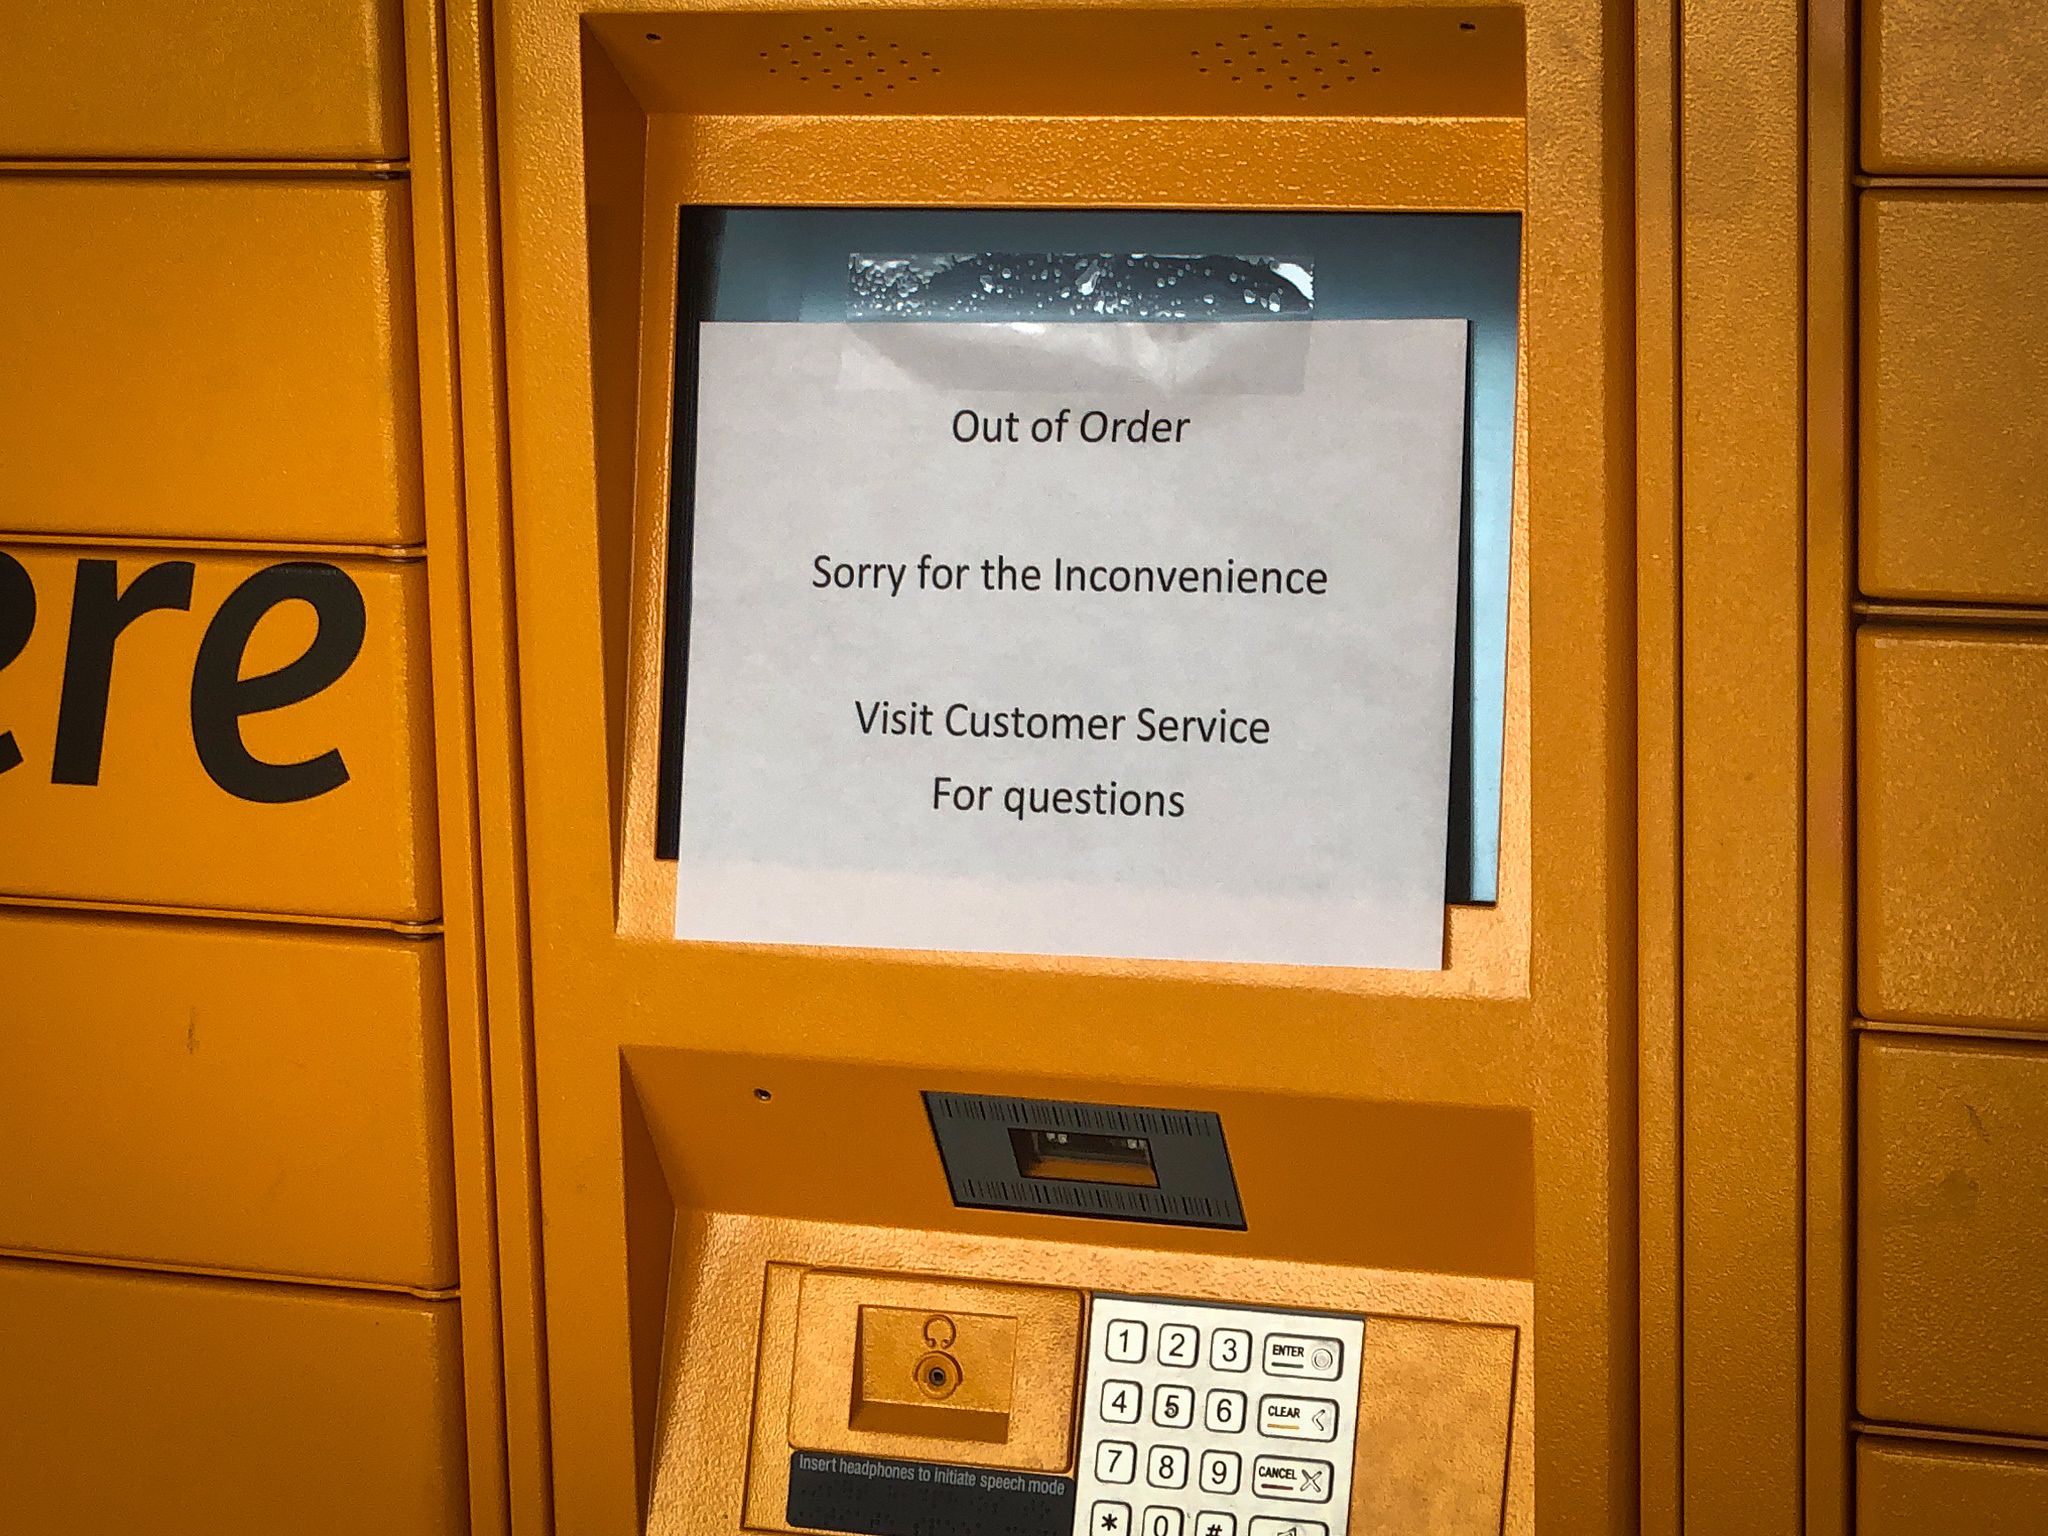 Amazon Locker: Out of Order